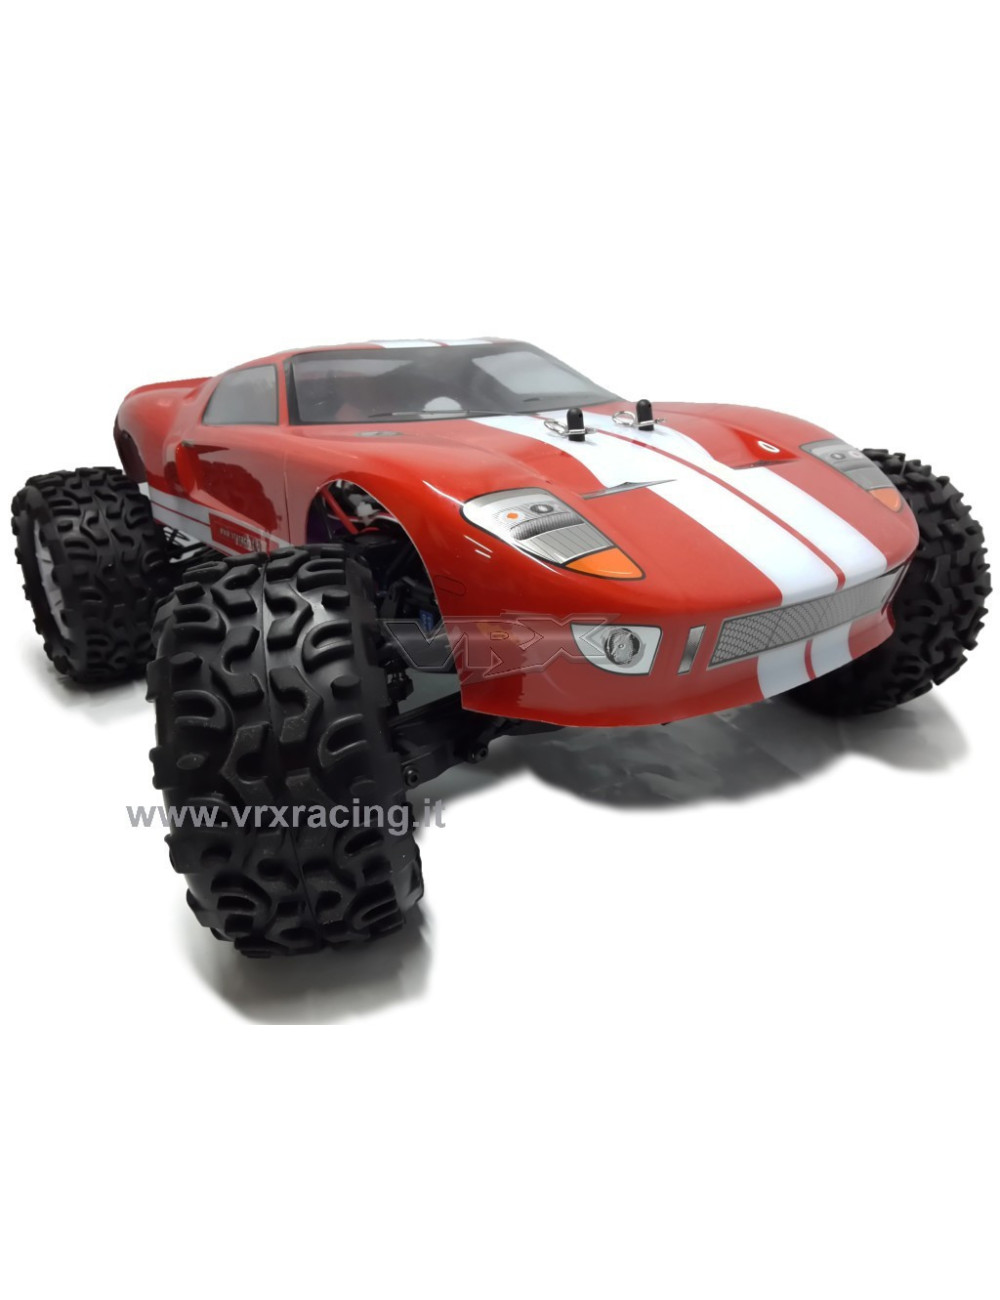 Rangster 1/10 Off-Road motore elettrico Brushless Radio 2.4ghz 4WD RTR VRX